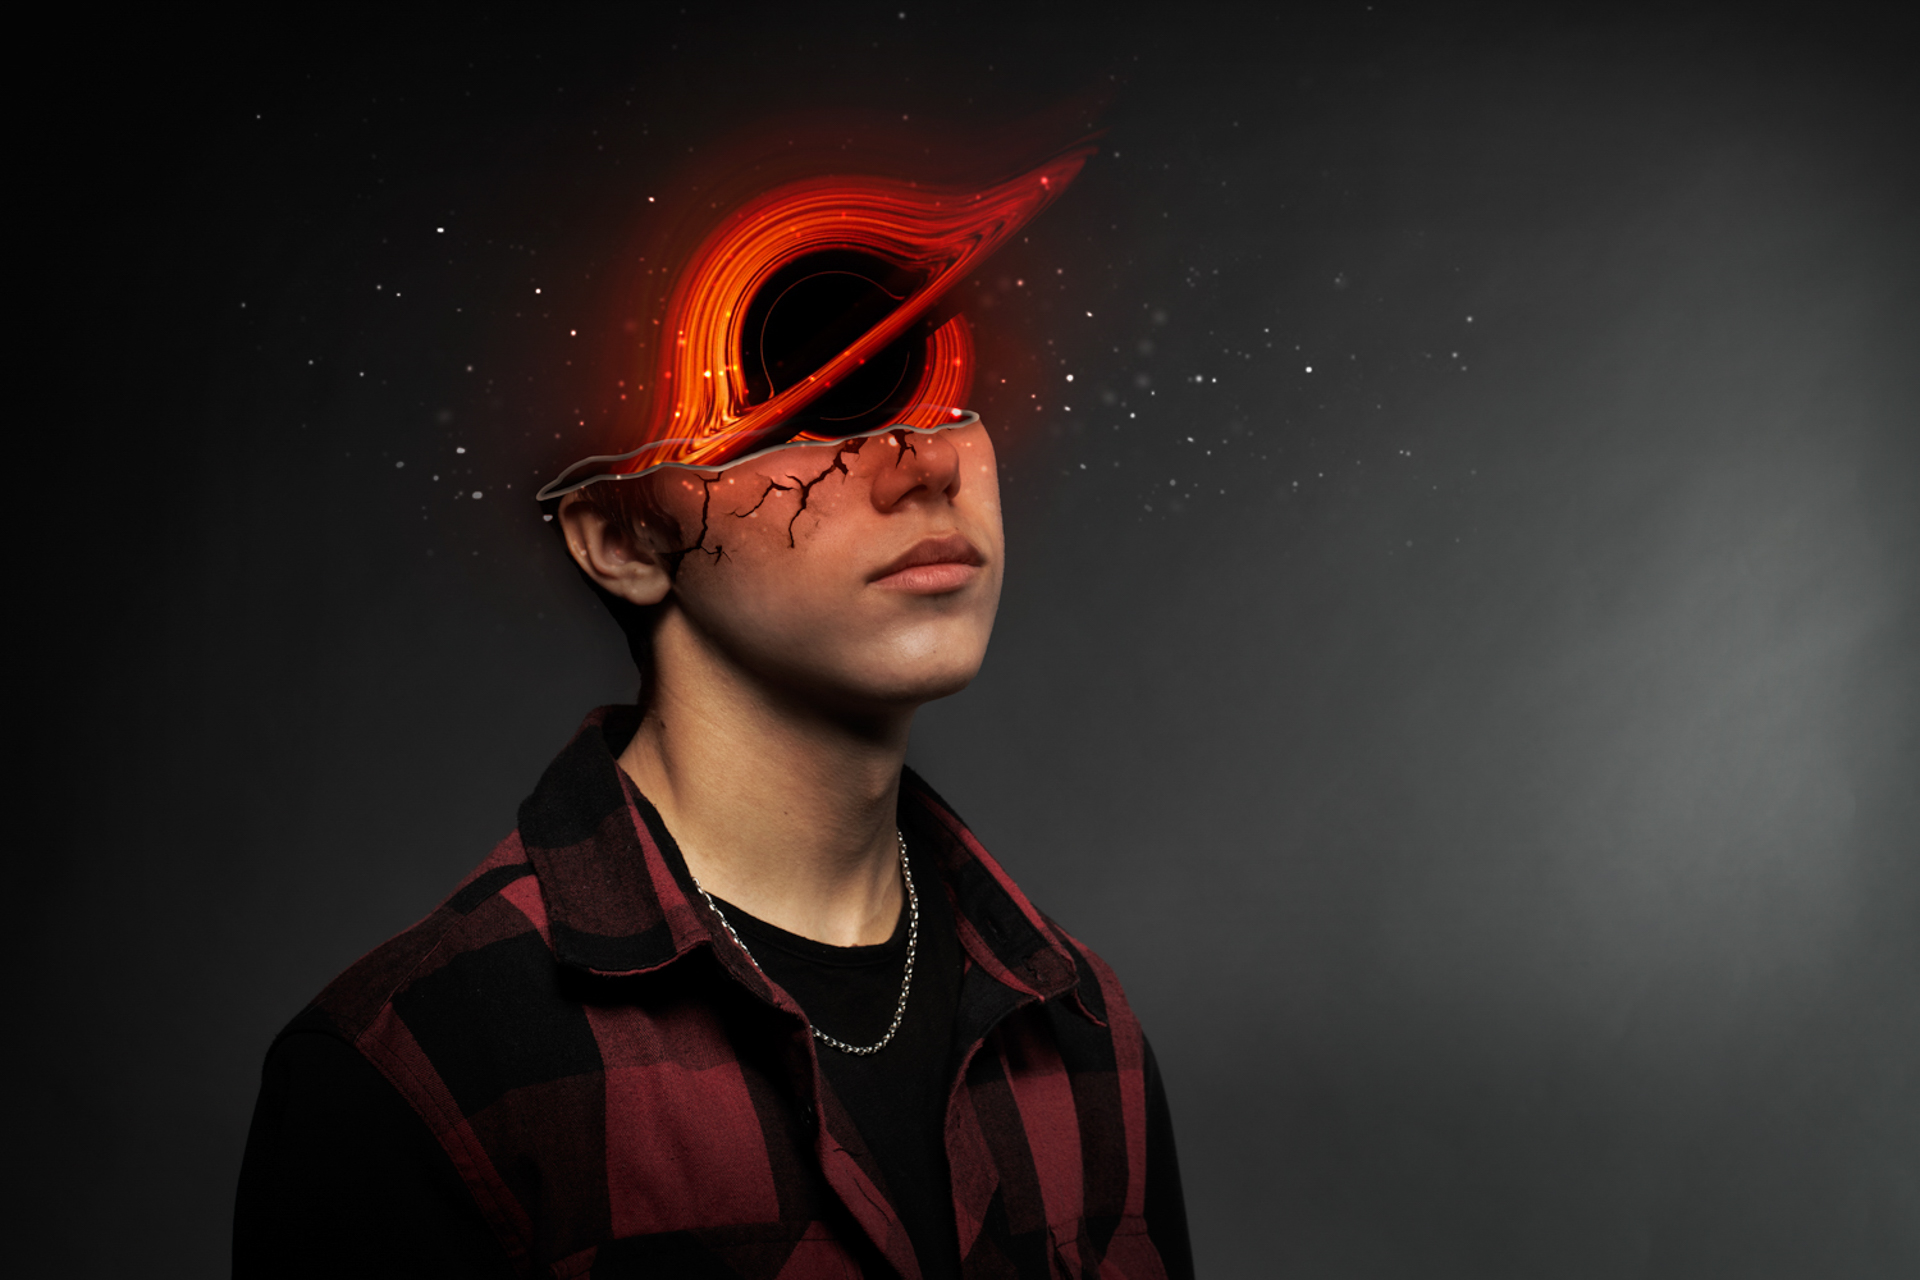 This photo depicts a man with half his face cut off, sliced just below his eyes. Coming out of his head is a black hole with red and orange colours. He is also wearing a red flannel and stars around the top of his head.